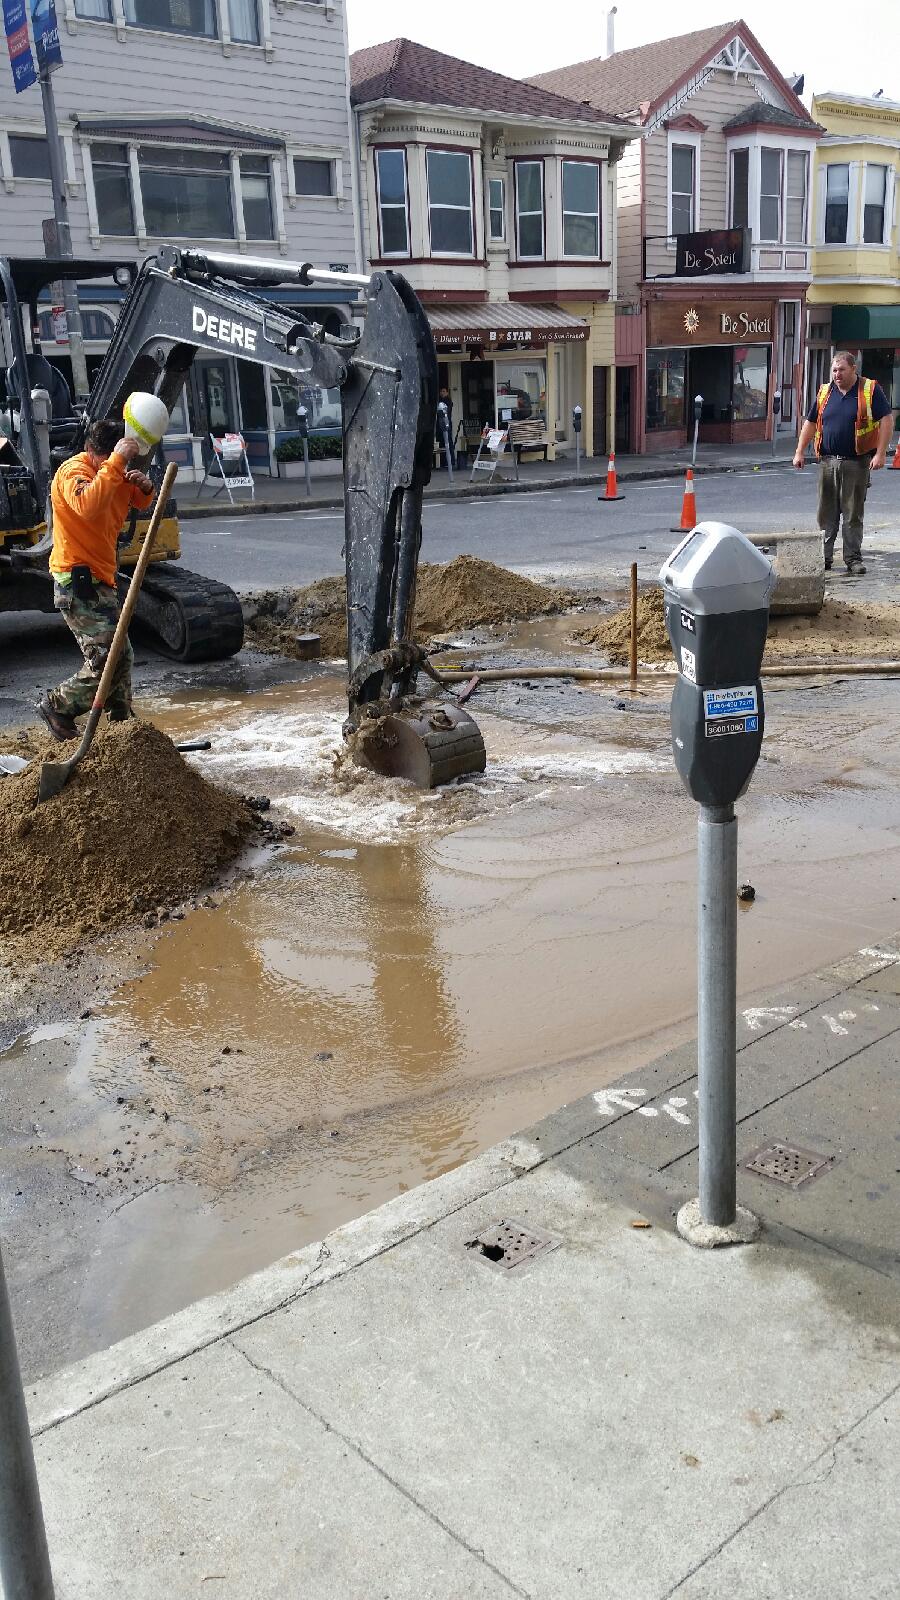 The site of the water main break on Clement Street near 3rd Avenue. Photo by David H.